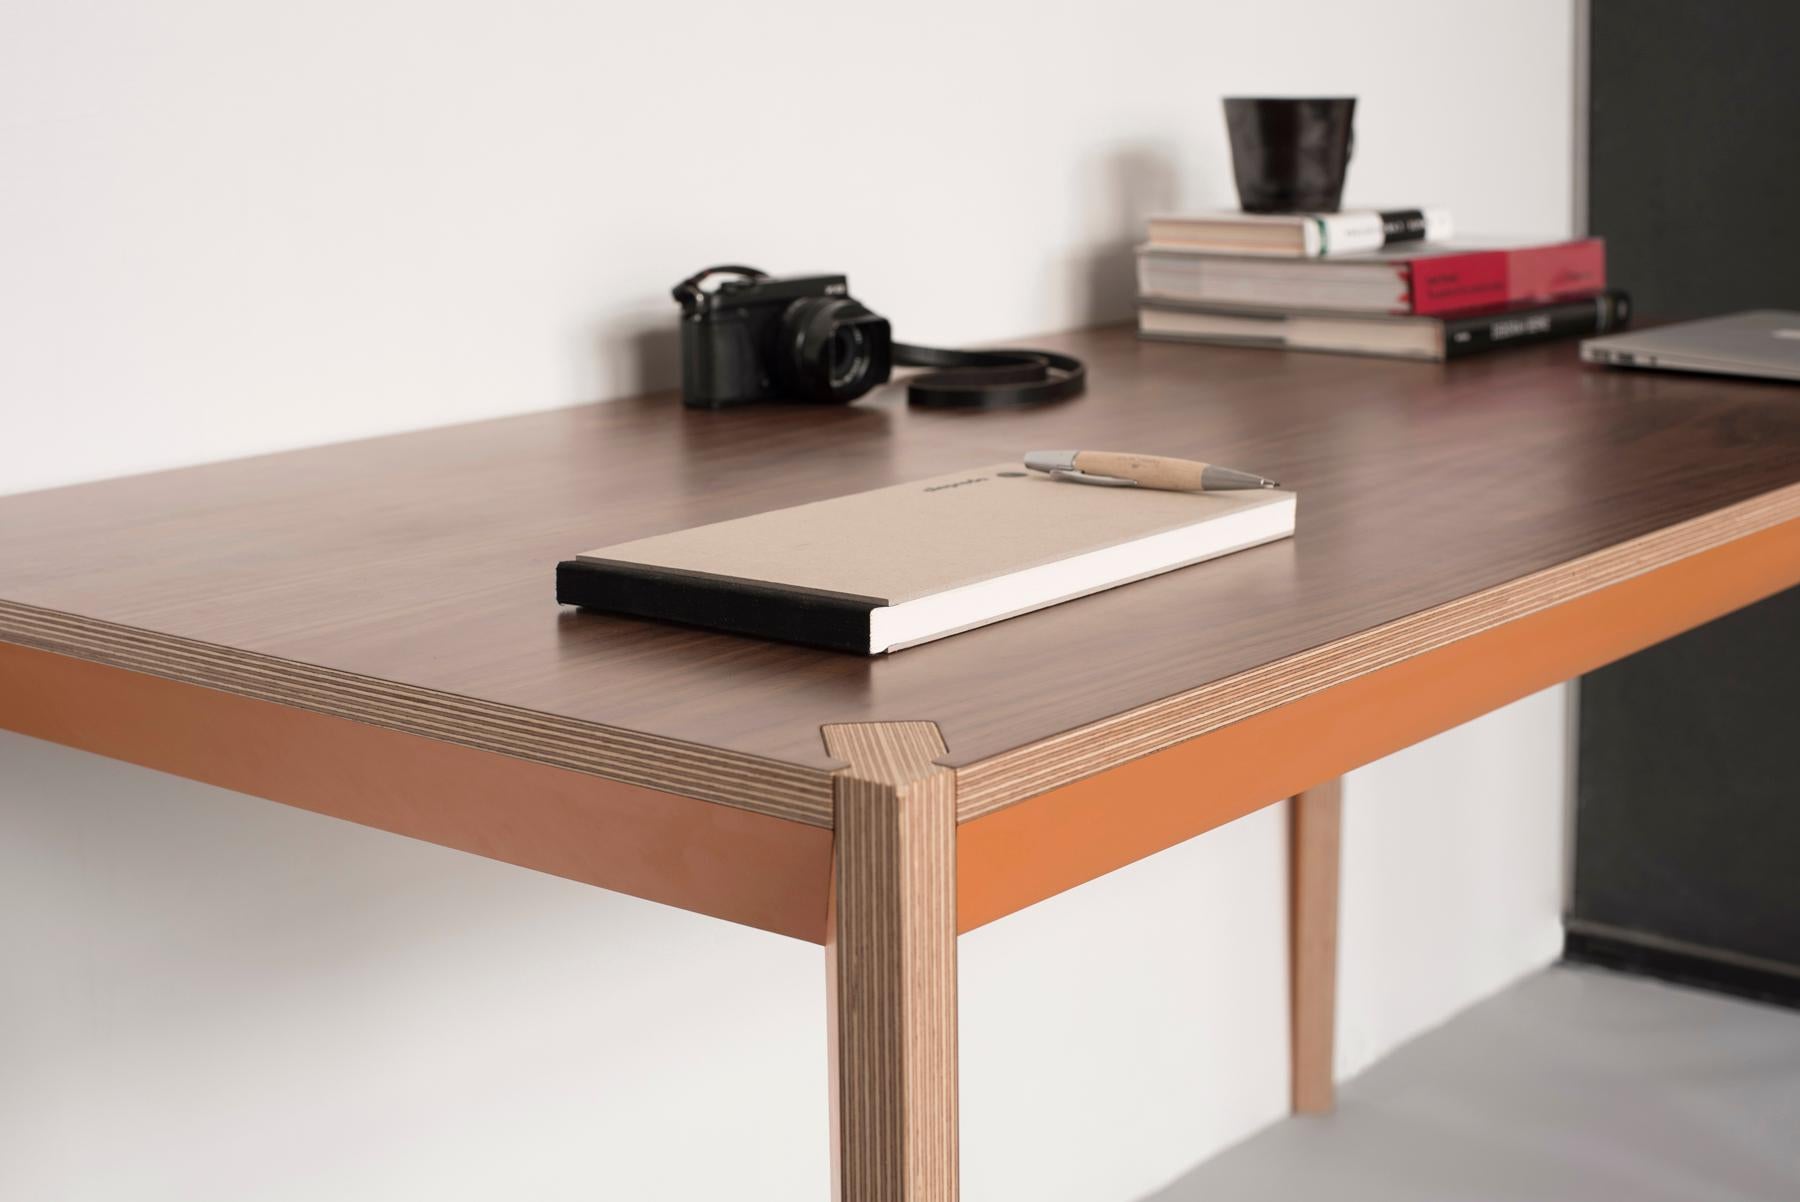 Joinery Walnut Orange MiMi Square Table by Miduny, Made in Italy